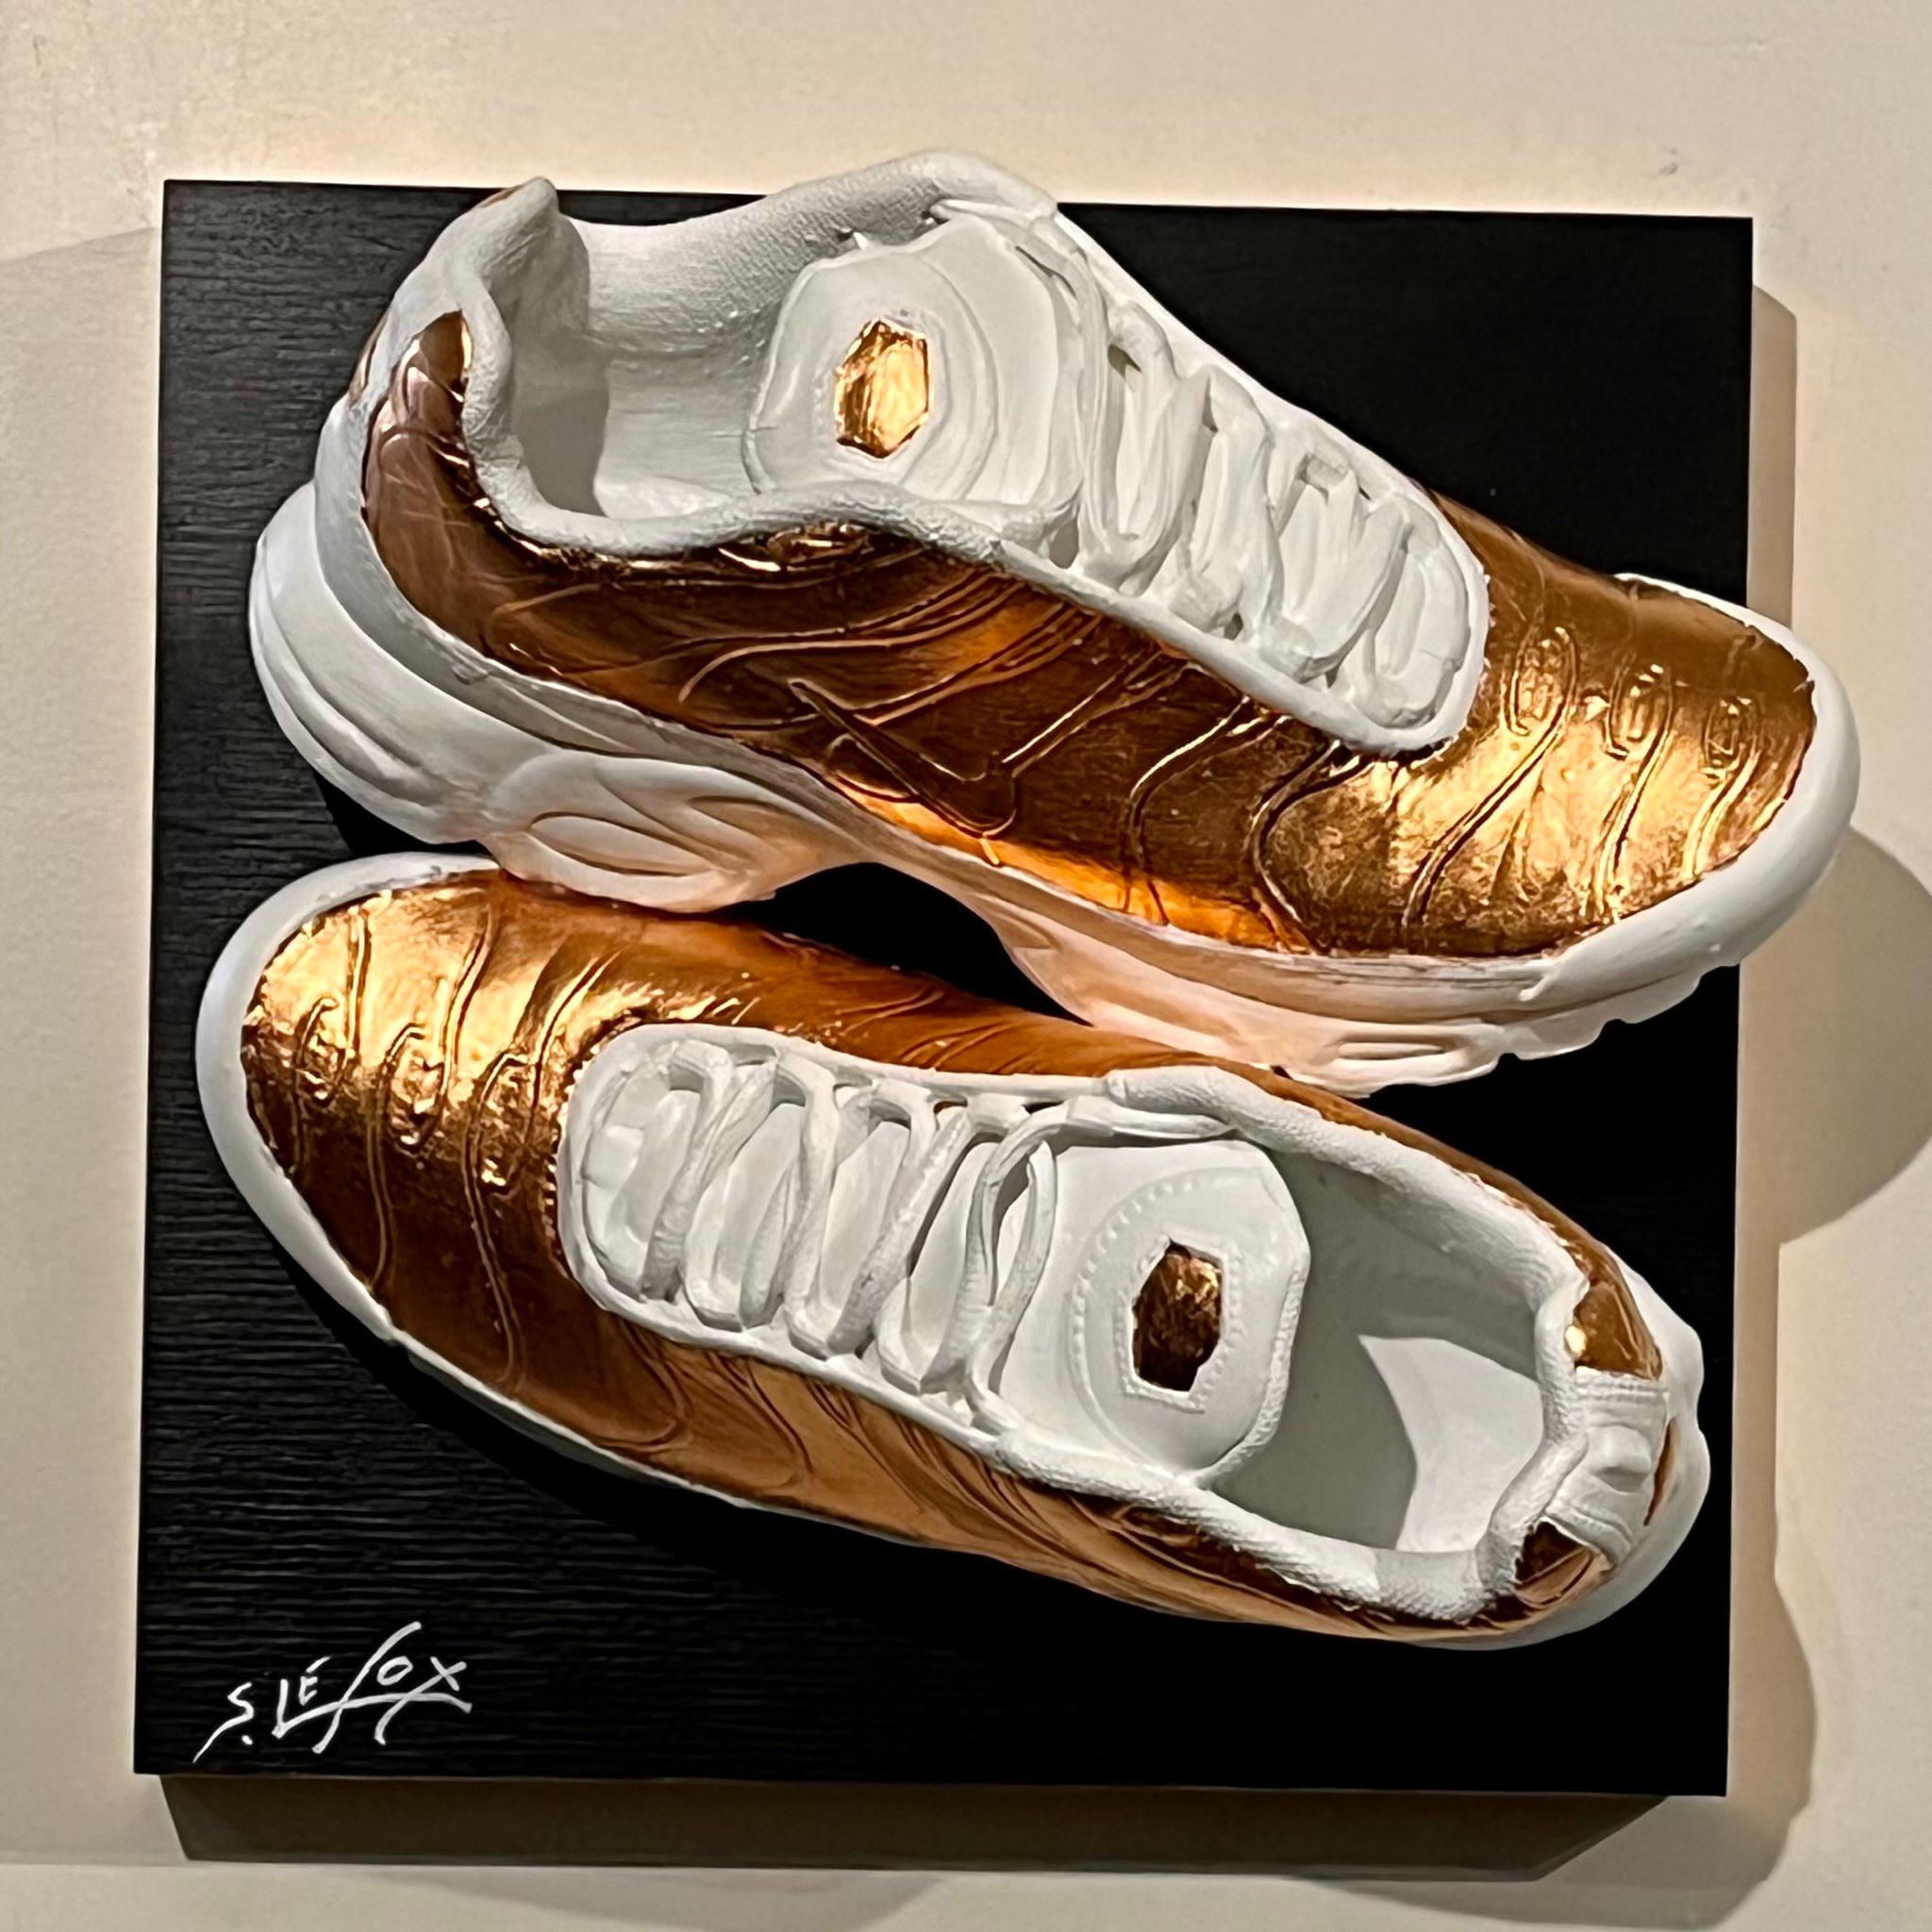 COPPER TUNED</br>Acrylic and copper leaf on Nike Air Max Tuned, wooden box 30 X 30 X 20 SBG 